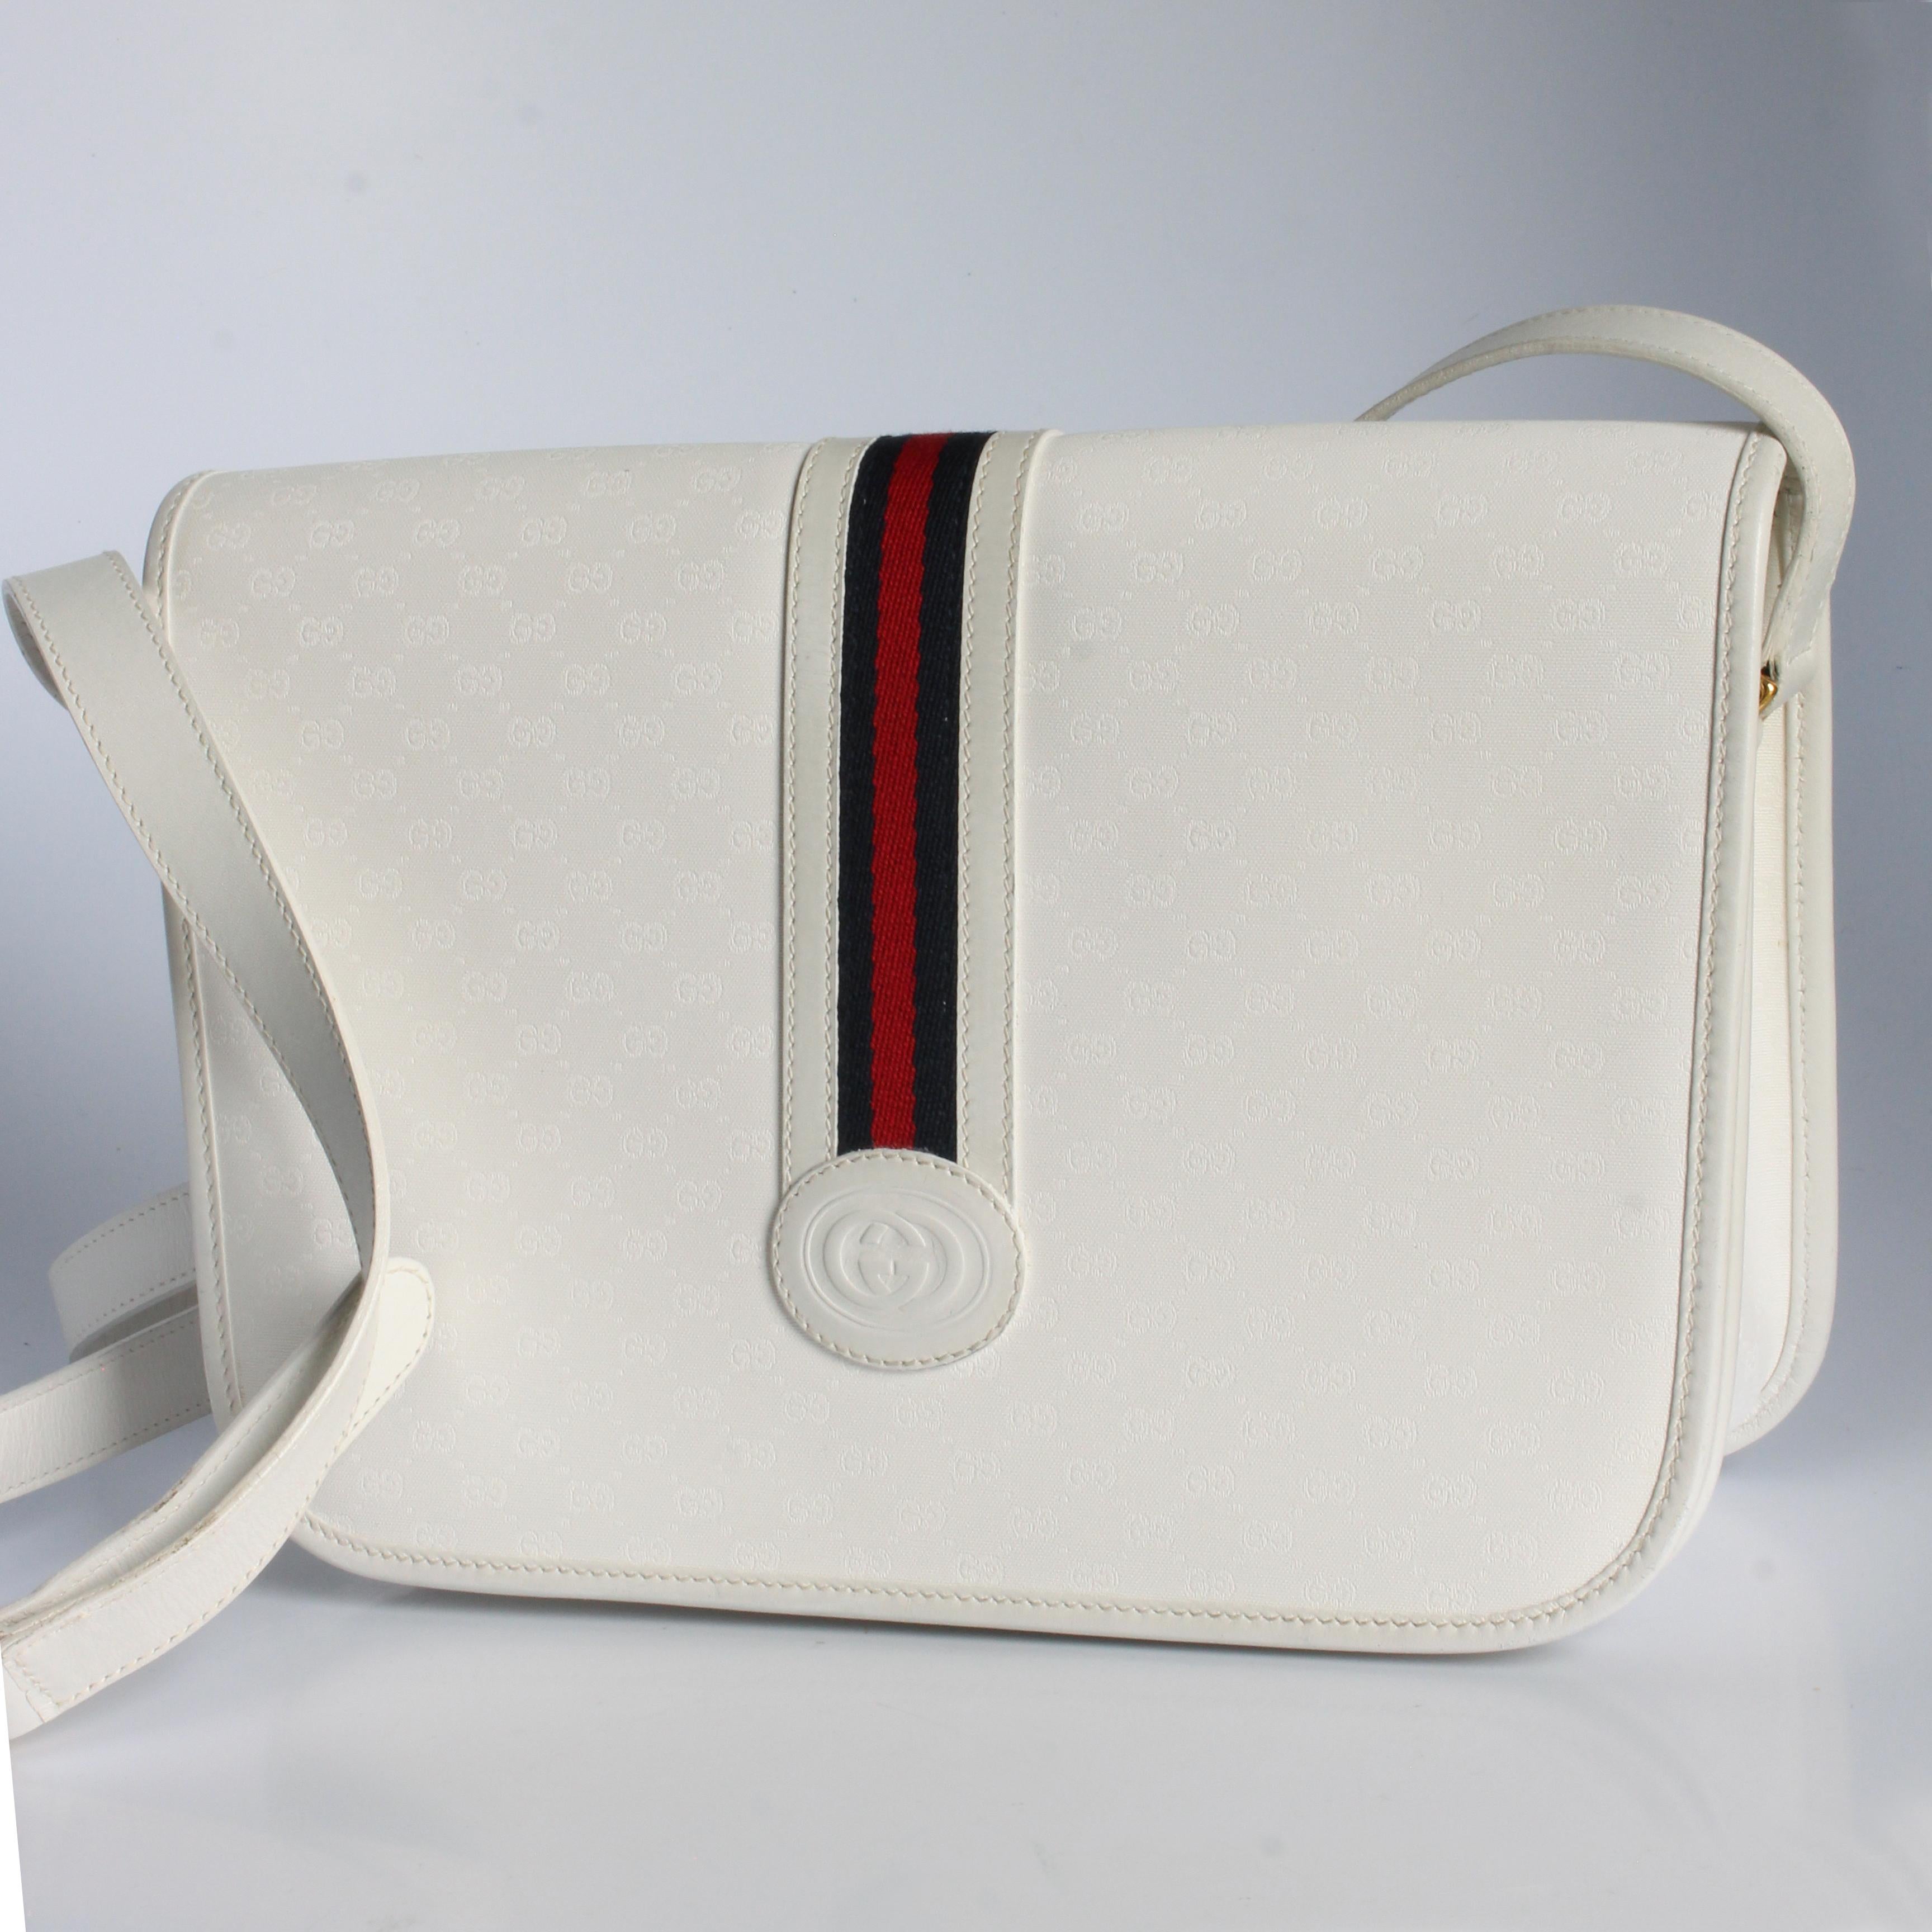 Gucci Shoulder Bag White GG Coated Canvas Leather Trim with Webbing Vintage HTF In Good Condition For Sale In Port Saint Lucie, FL